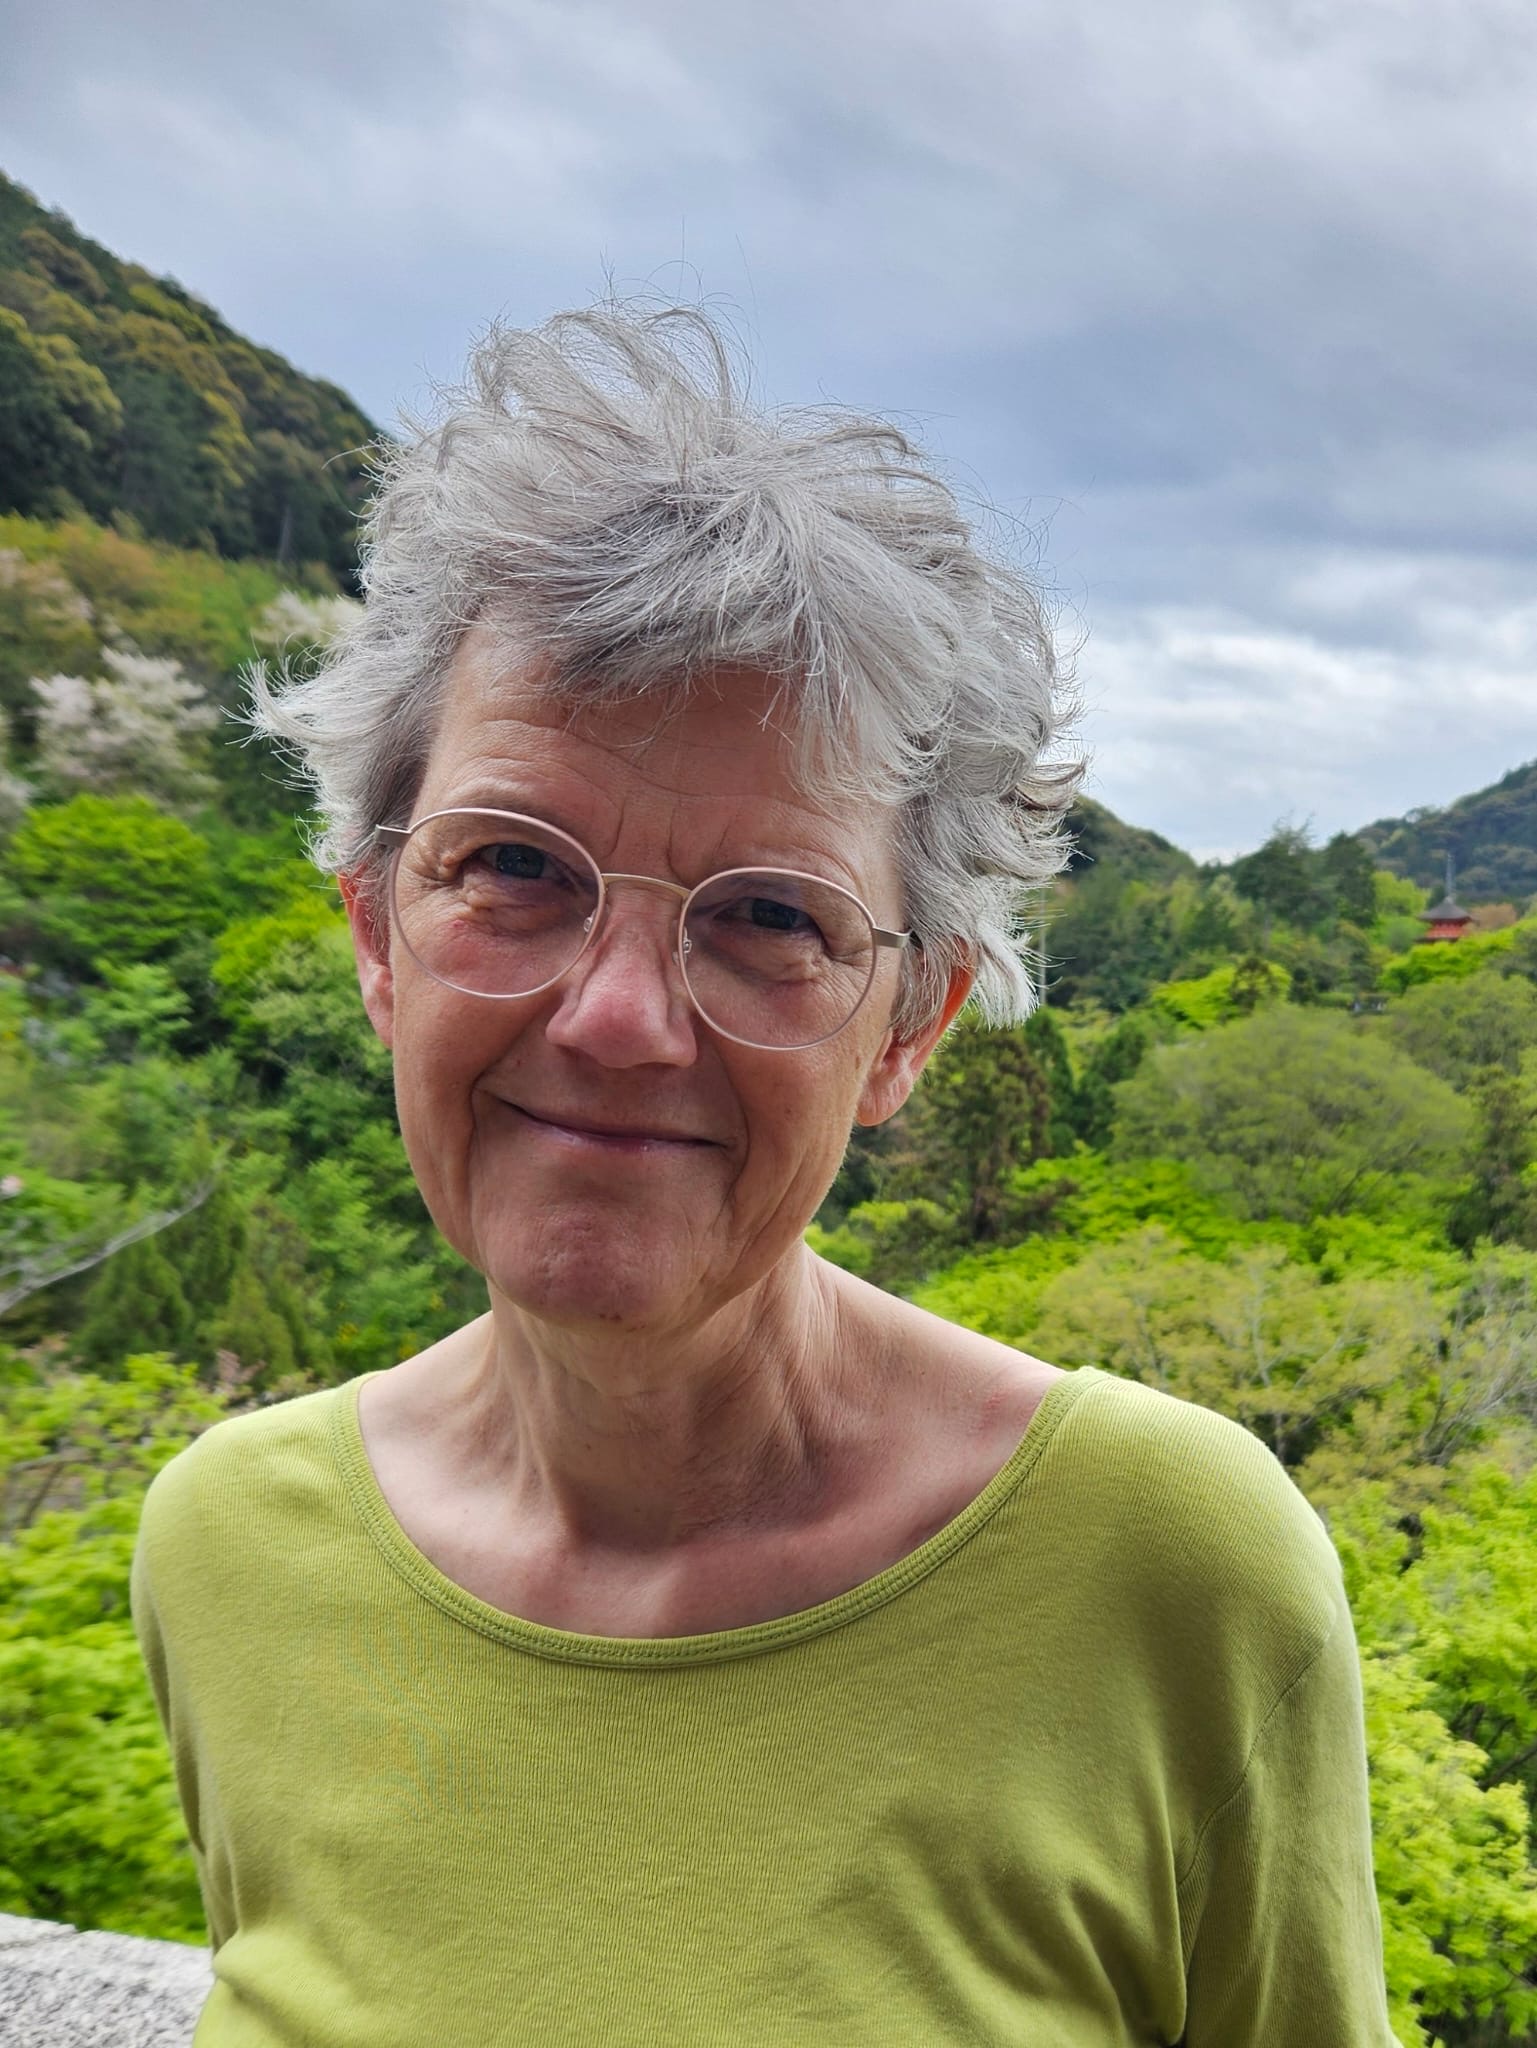 Shoulder length portrait of Annemarie Mol outside at the top of mountains among a lush green landscape of forest and blue sky, she is wearing a lime green  long sleeve top and thin wireframe glasses and short wispy grey hair